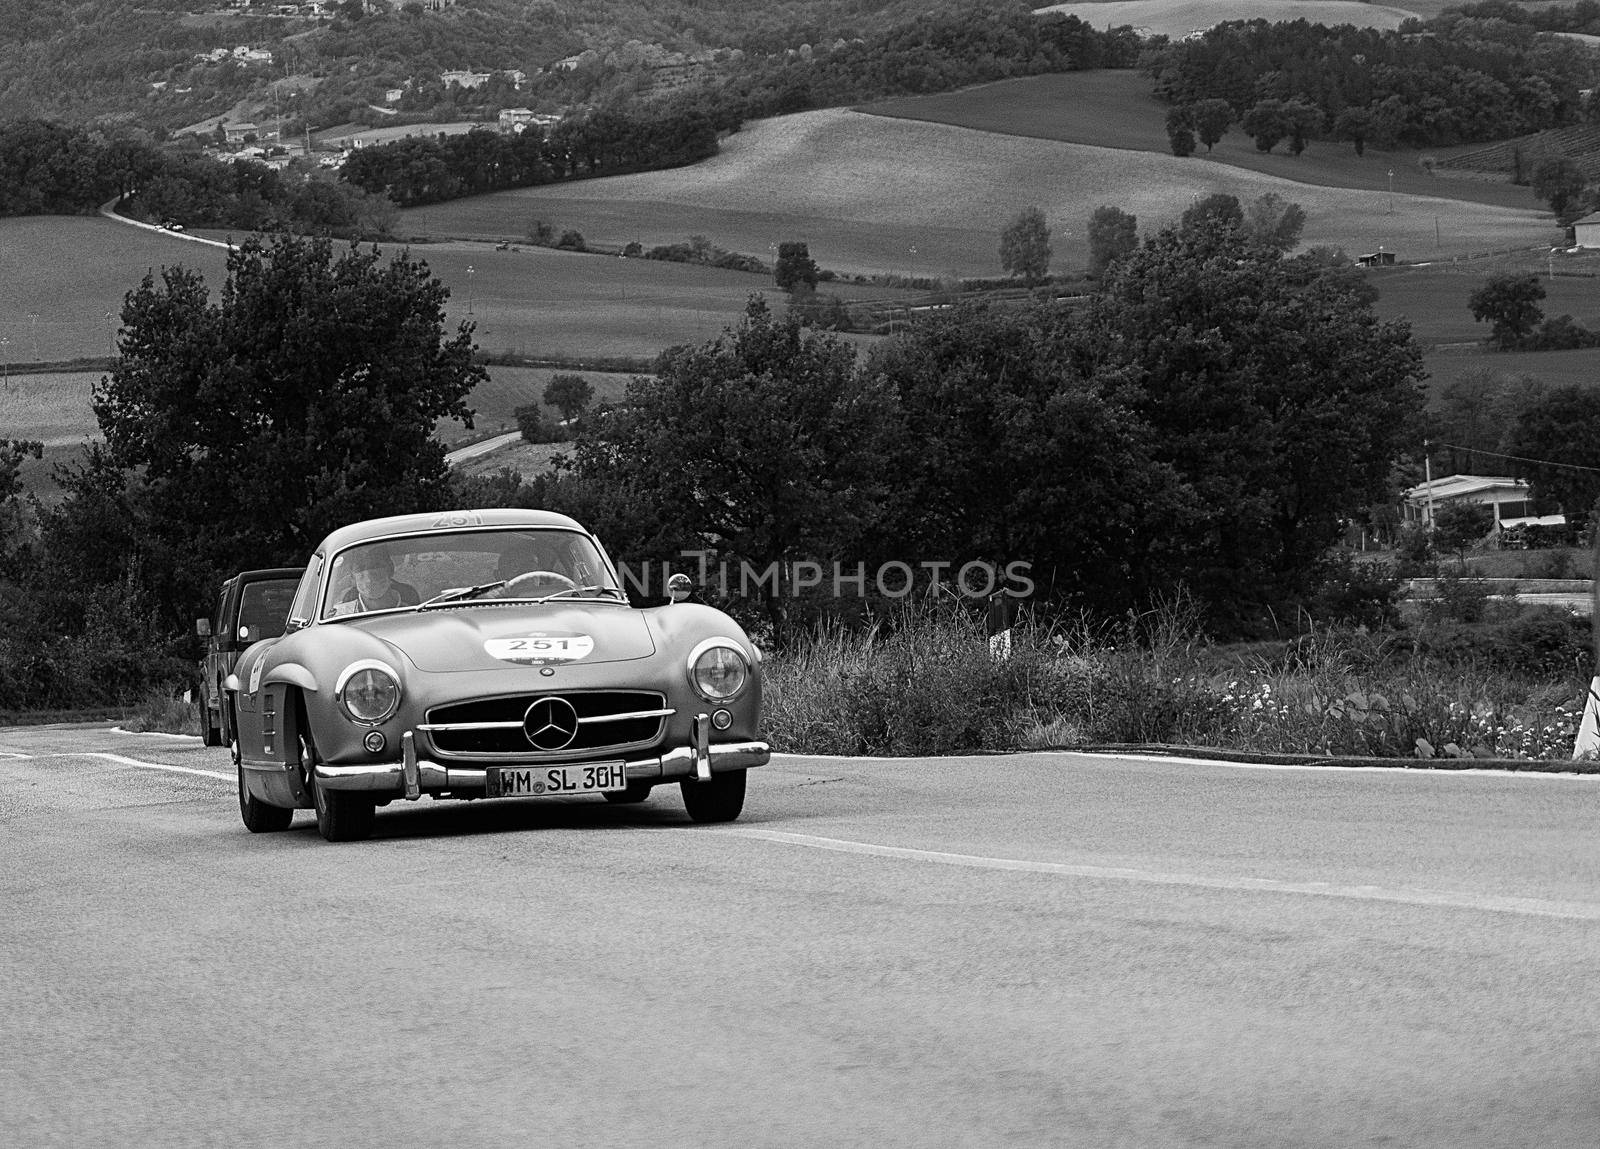 MERCEDES-BENZ 300 SL W 198 1954 an old racing car in rally Mille Miglia 2020 the famous italian historical race (1927-1957) by massimocampanari